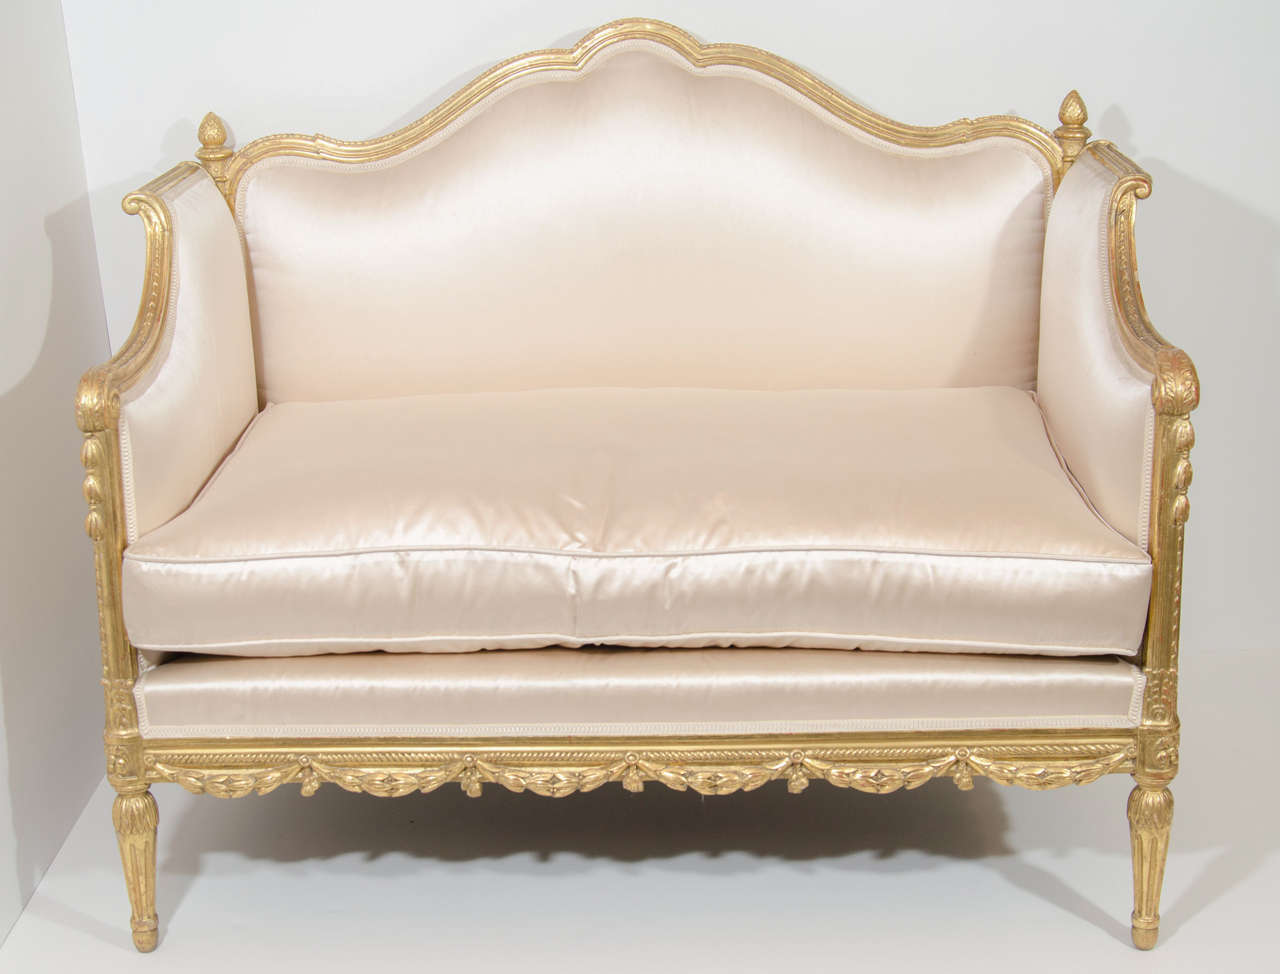 An exquisite and unique antique French Louis XVI style carved giltwood loveseats of superb craftsmanship upholstered in cream silk fabric with silk cushion.